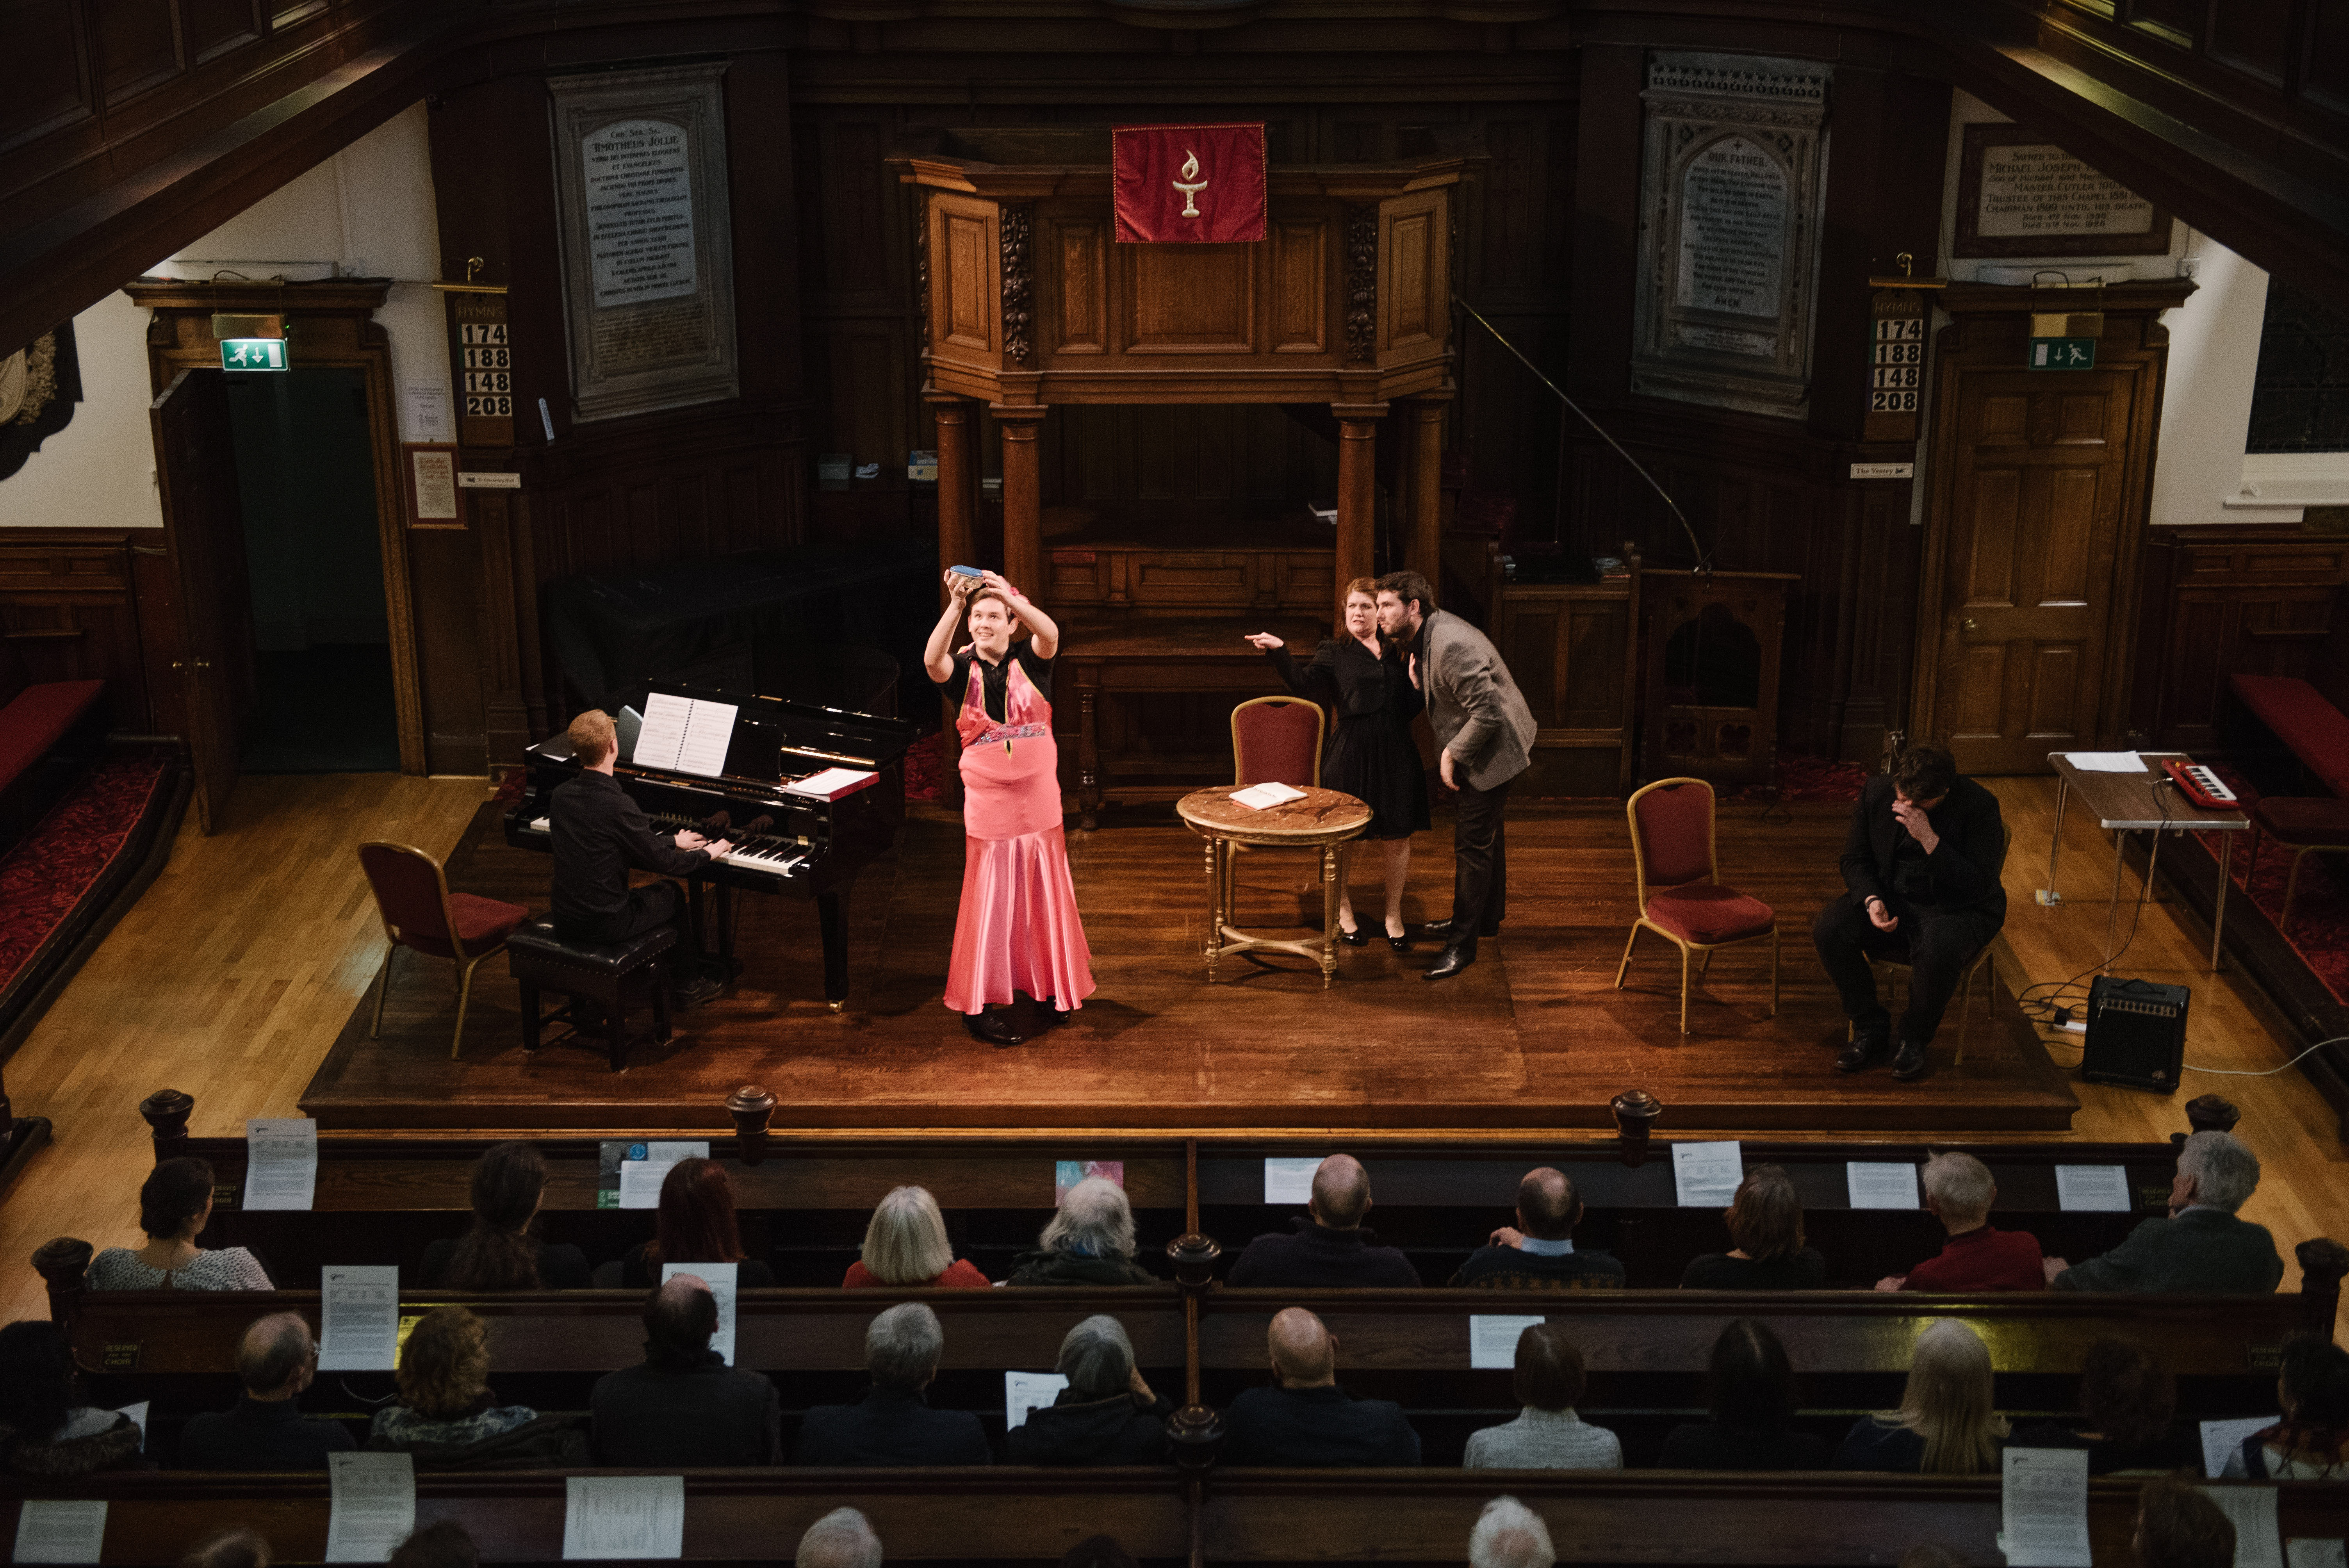 Palindromic mini-opera
Performed by Opera on Location, Upper Chapel, Sheffield, Classical Weekend